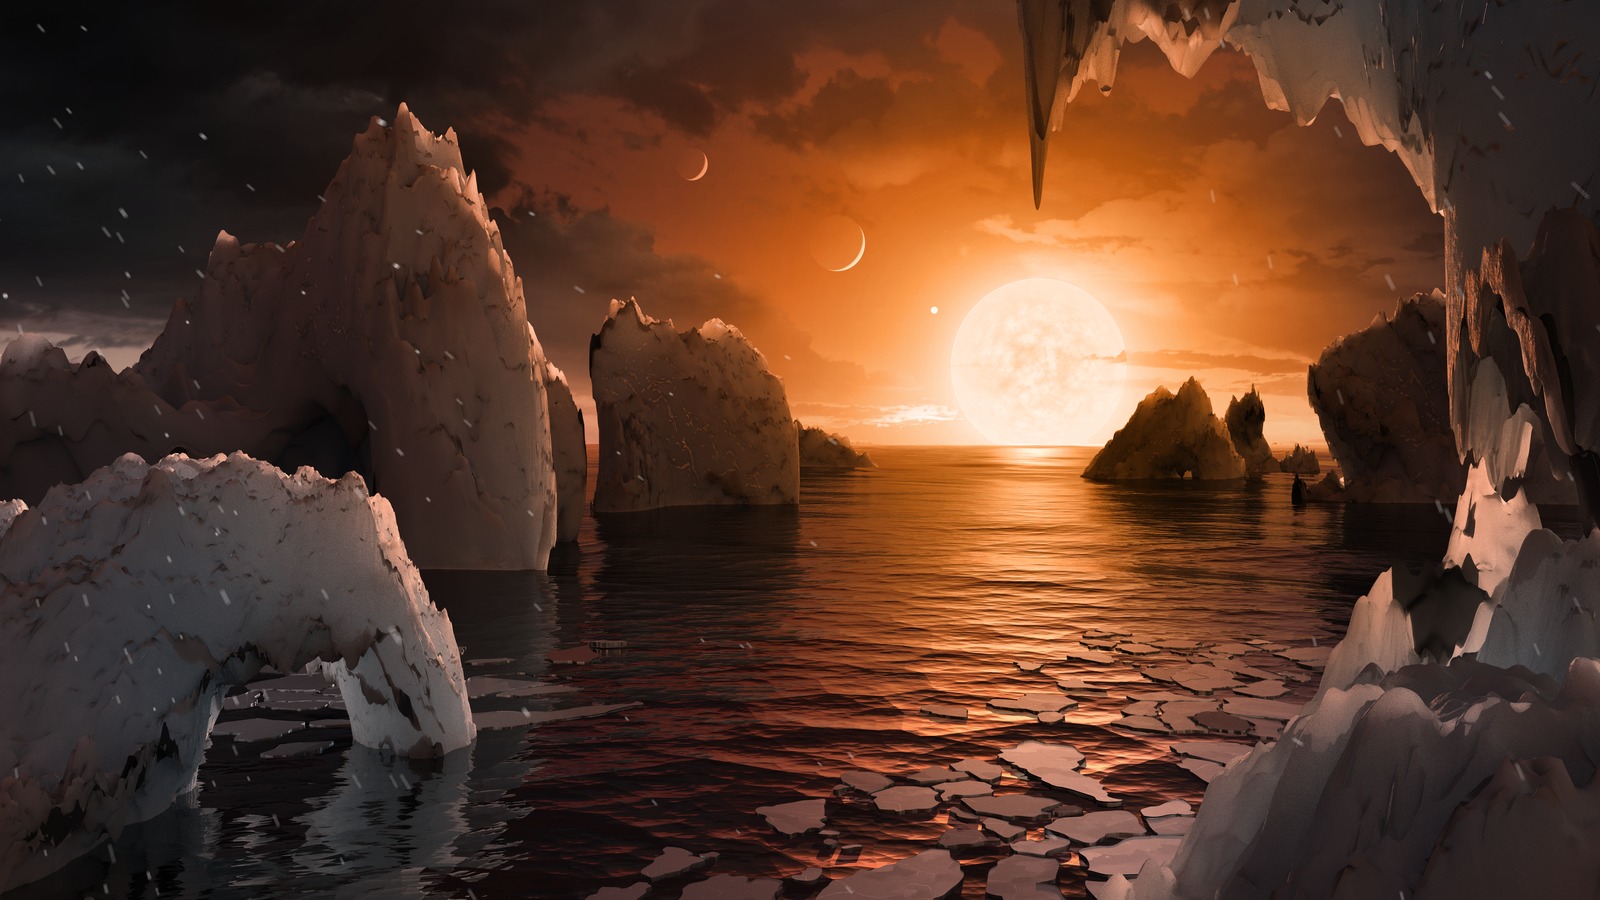 Artist concept of the surface of exoplanet TRAPPIST-1f. In this image you see several rock formations in the sea whilst a glowing sun sets in the distance.